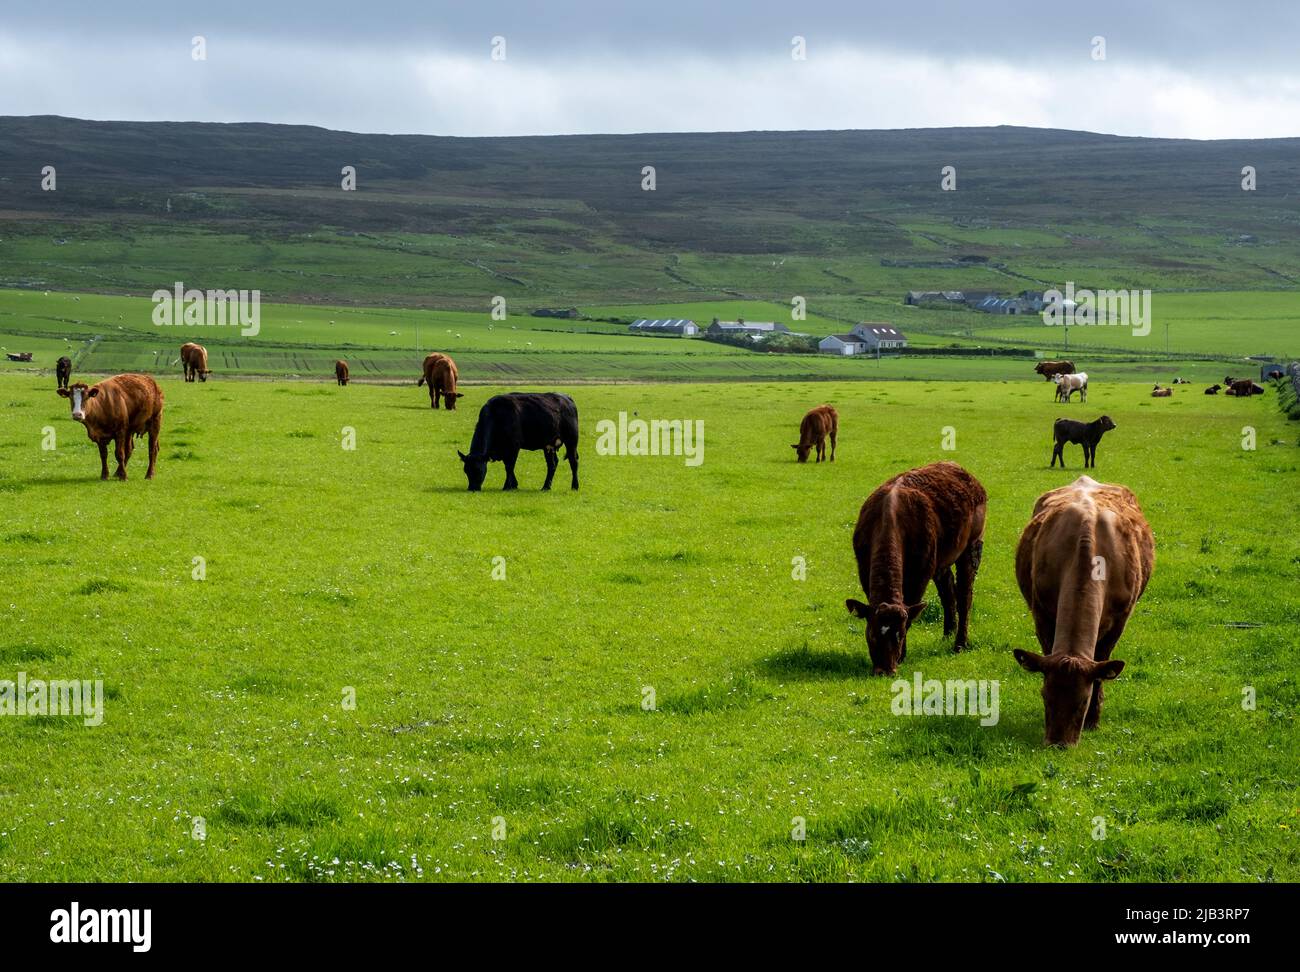 Cattle grazing in a field on the Island of Rousay, Orkney Islands, Scotland. Stock Photo